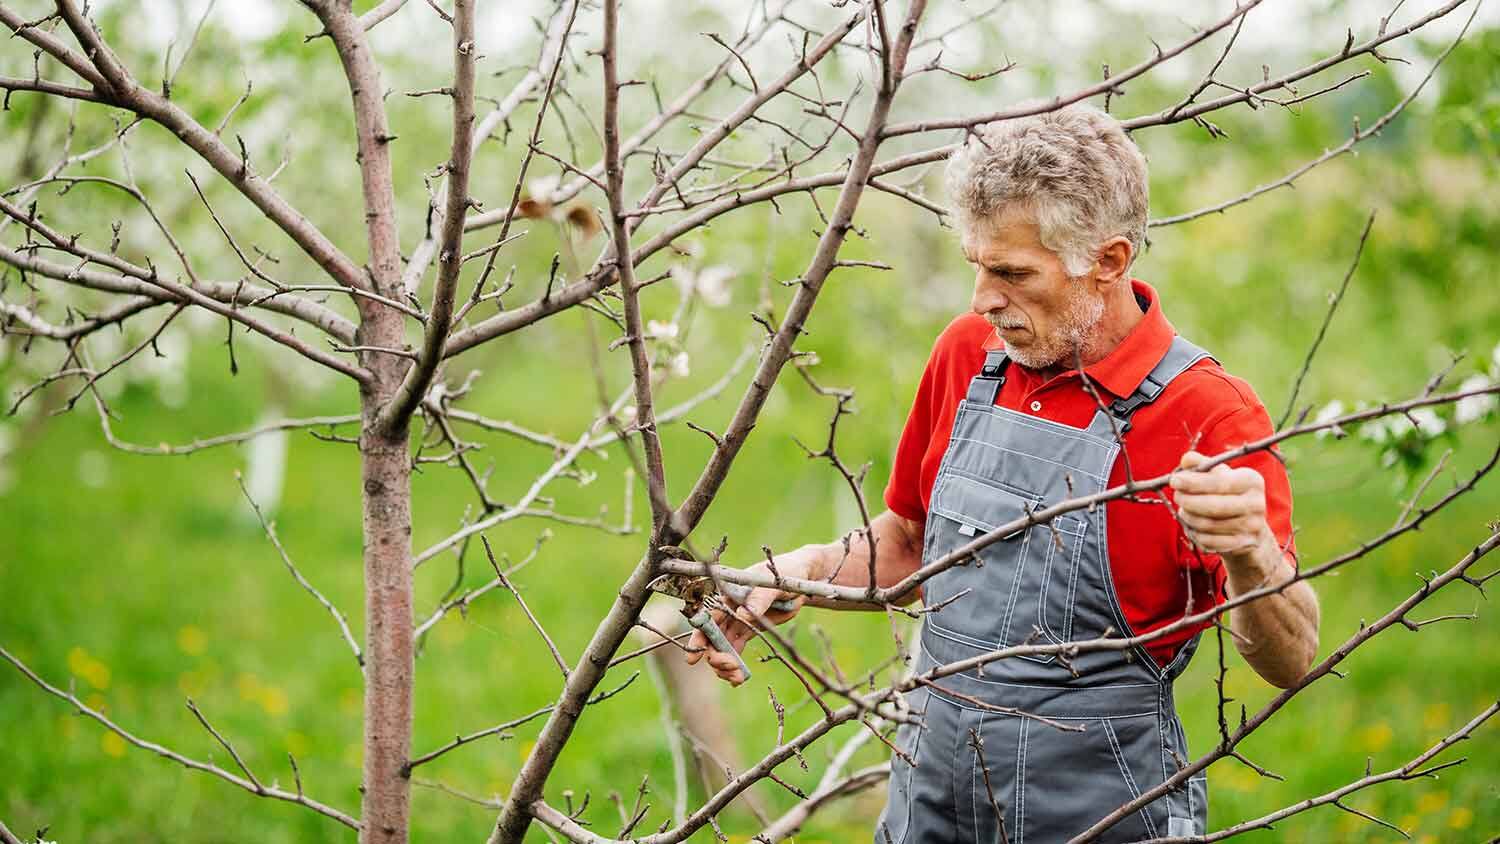 When Do You Trim Apple Trees